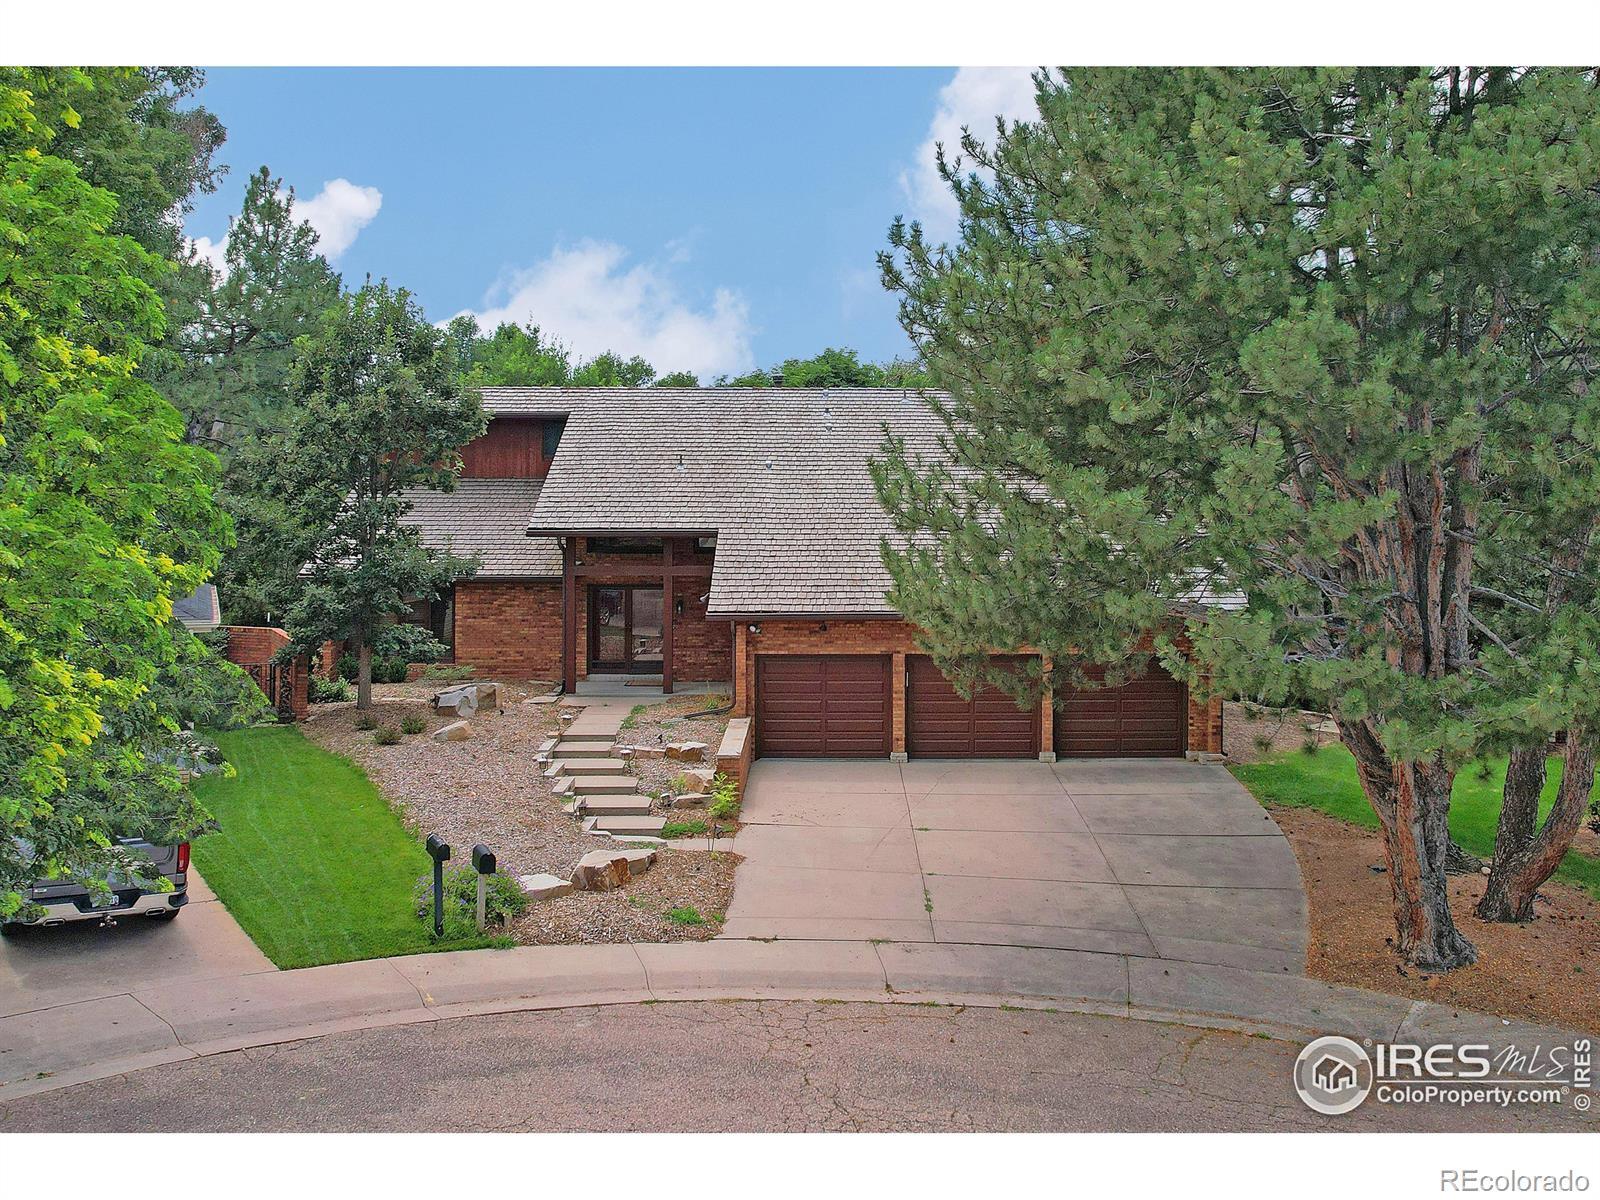 1715  37th Avenue, greeley MLS: 456789993793 Beds: 4 Baths: 4 Price: $650,000